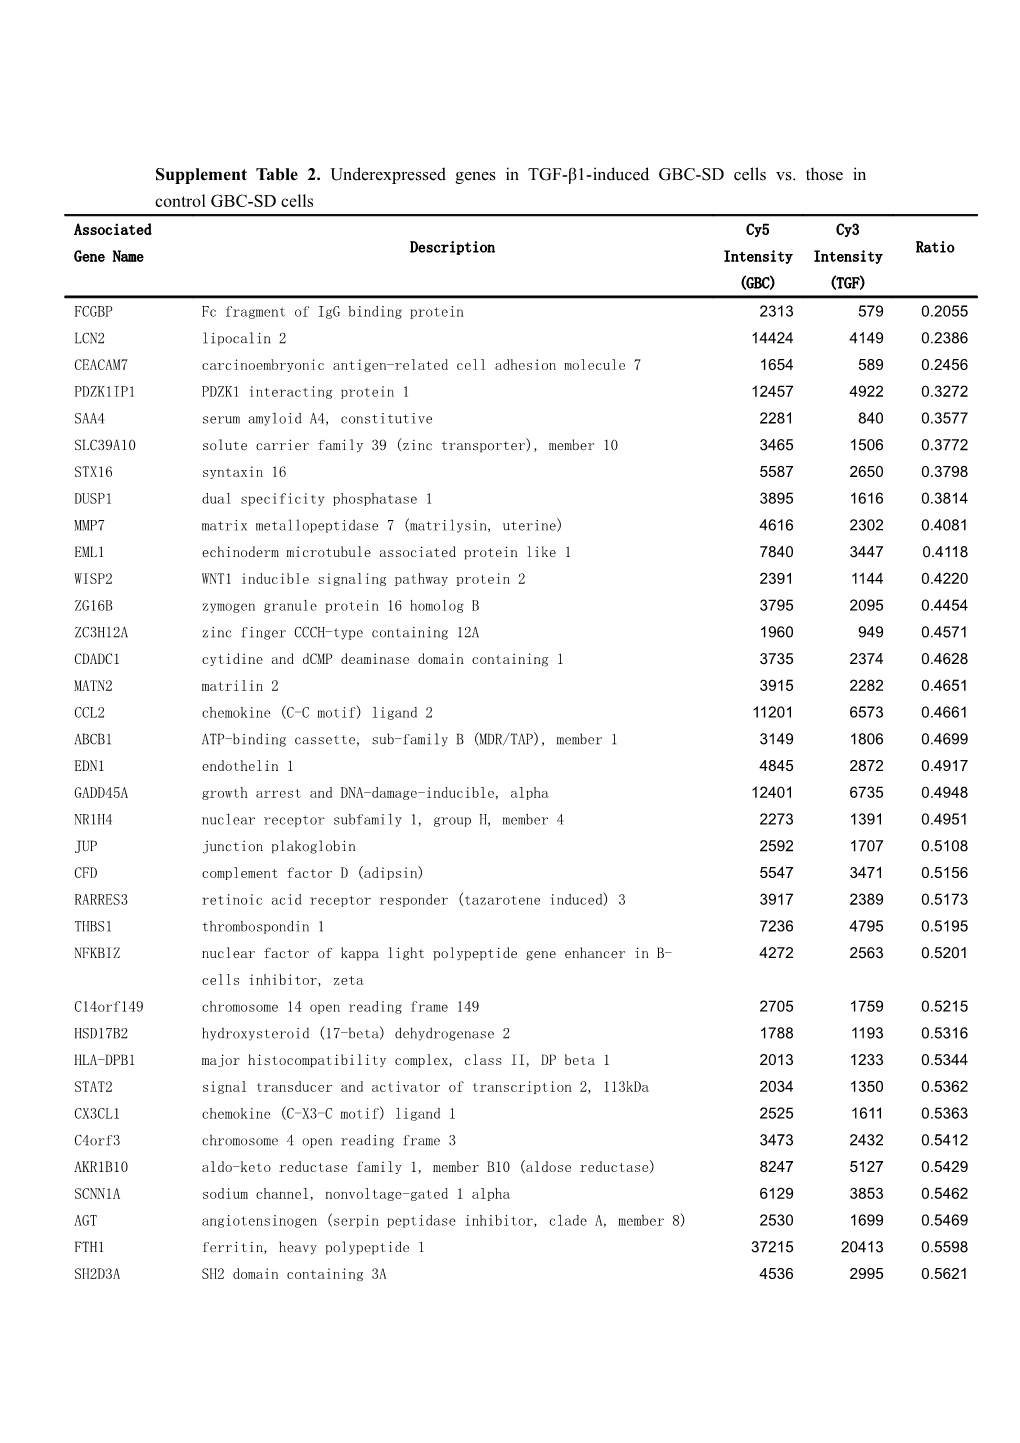 Table 1. Overexpressed Genes in the TGF-Β1 Induced GBC-SD Cells Compared with Those Genes